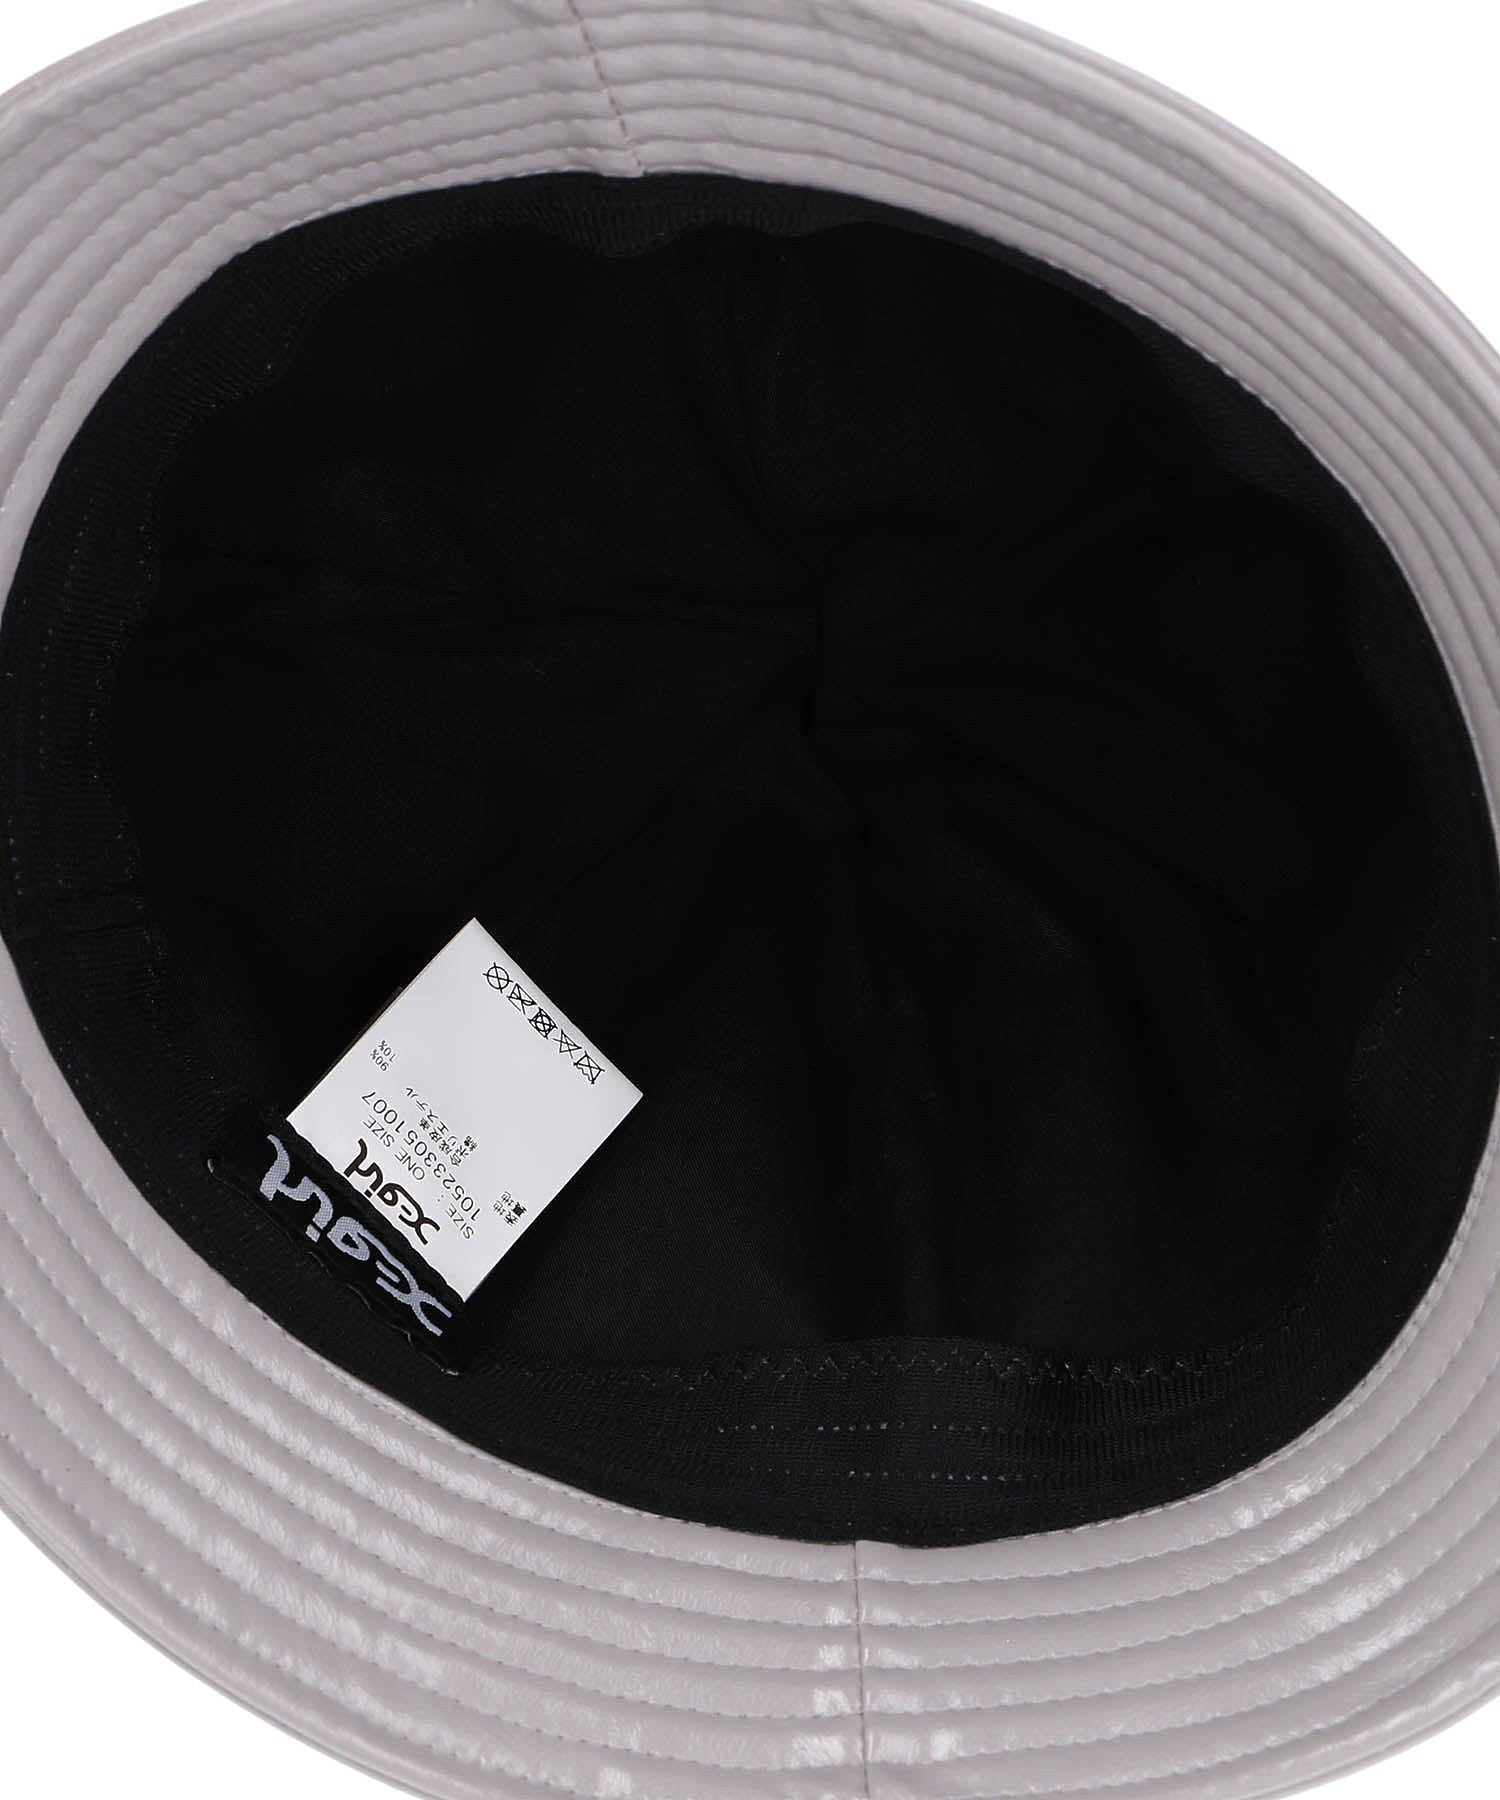 FAUX LEATHER METRO HAT X-girl